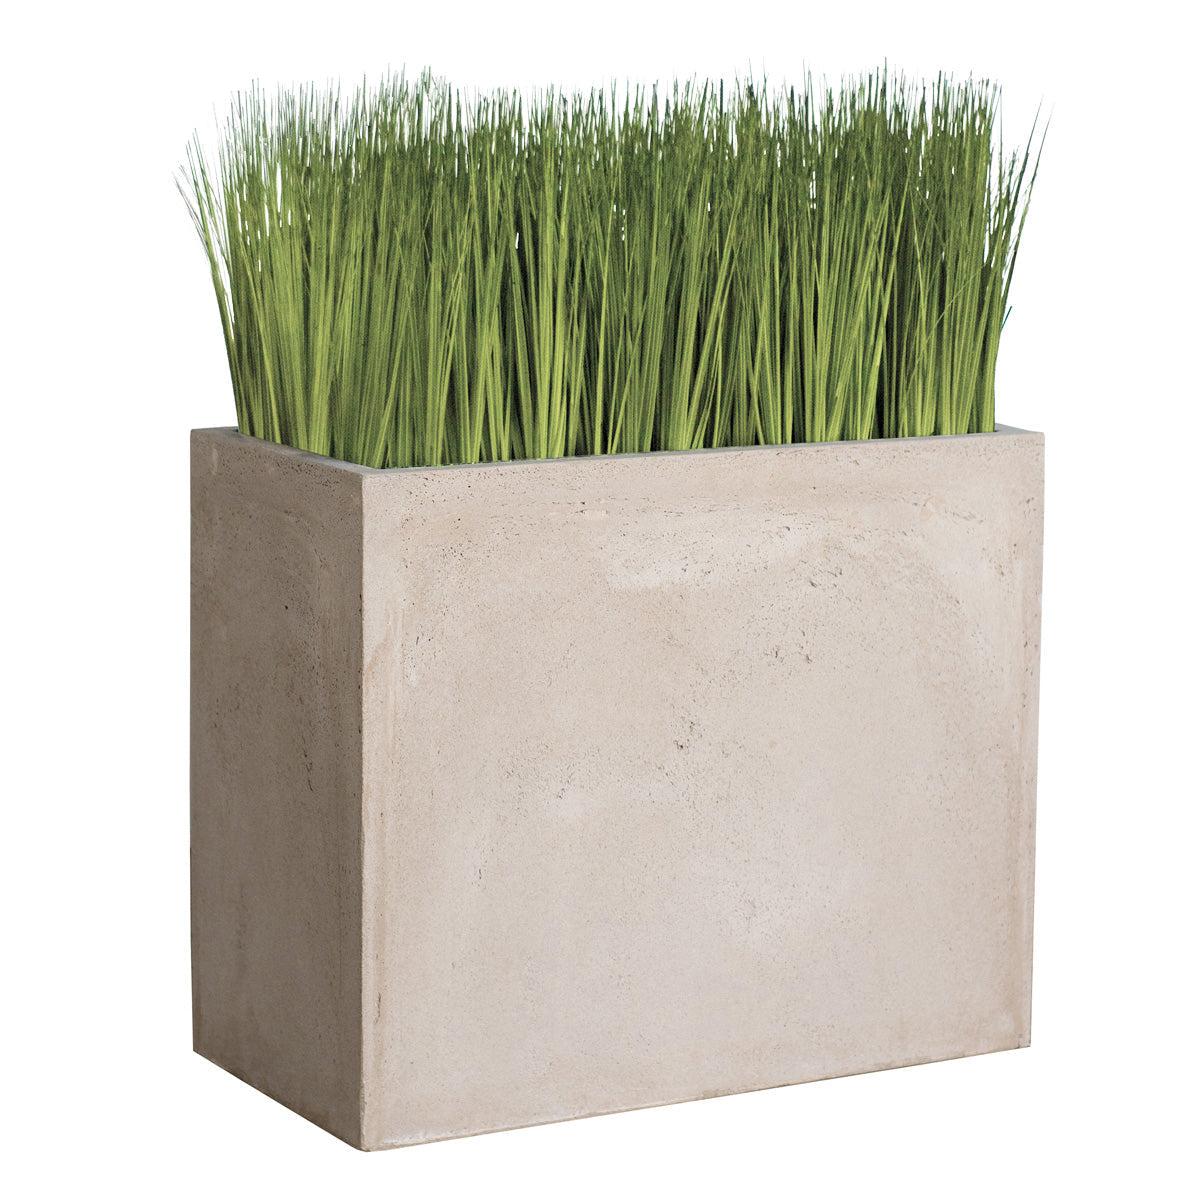 Grass - Japanese Grass In Urbano - LG-Gold Leaf Design Group-GOLDL-HY3087-LG-PlantersRectangle-1-France and Son